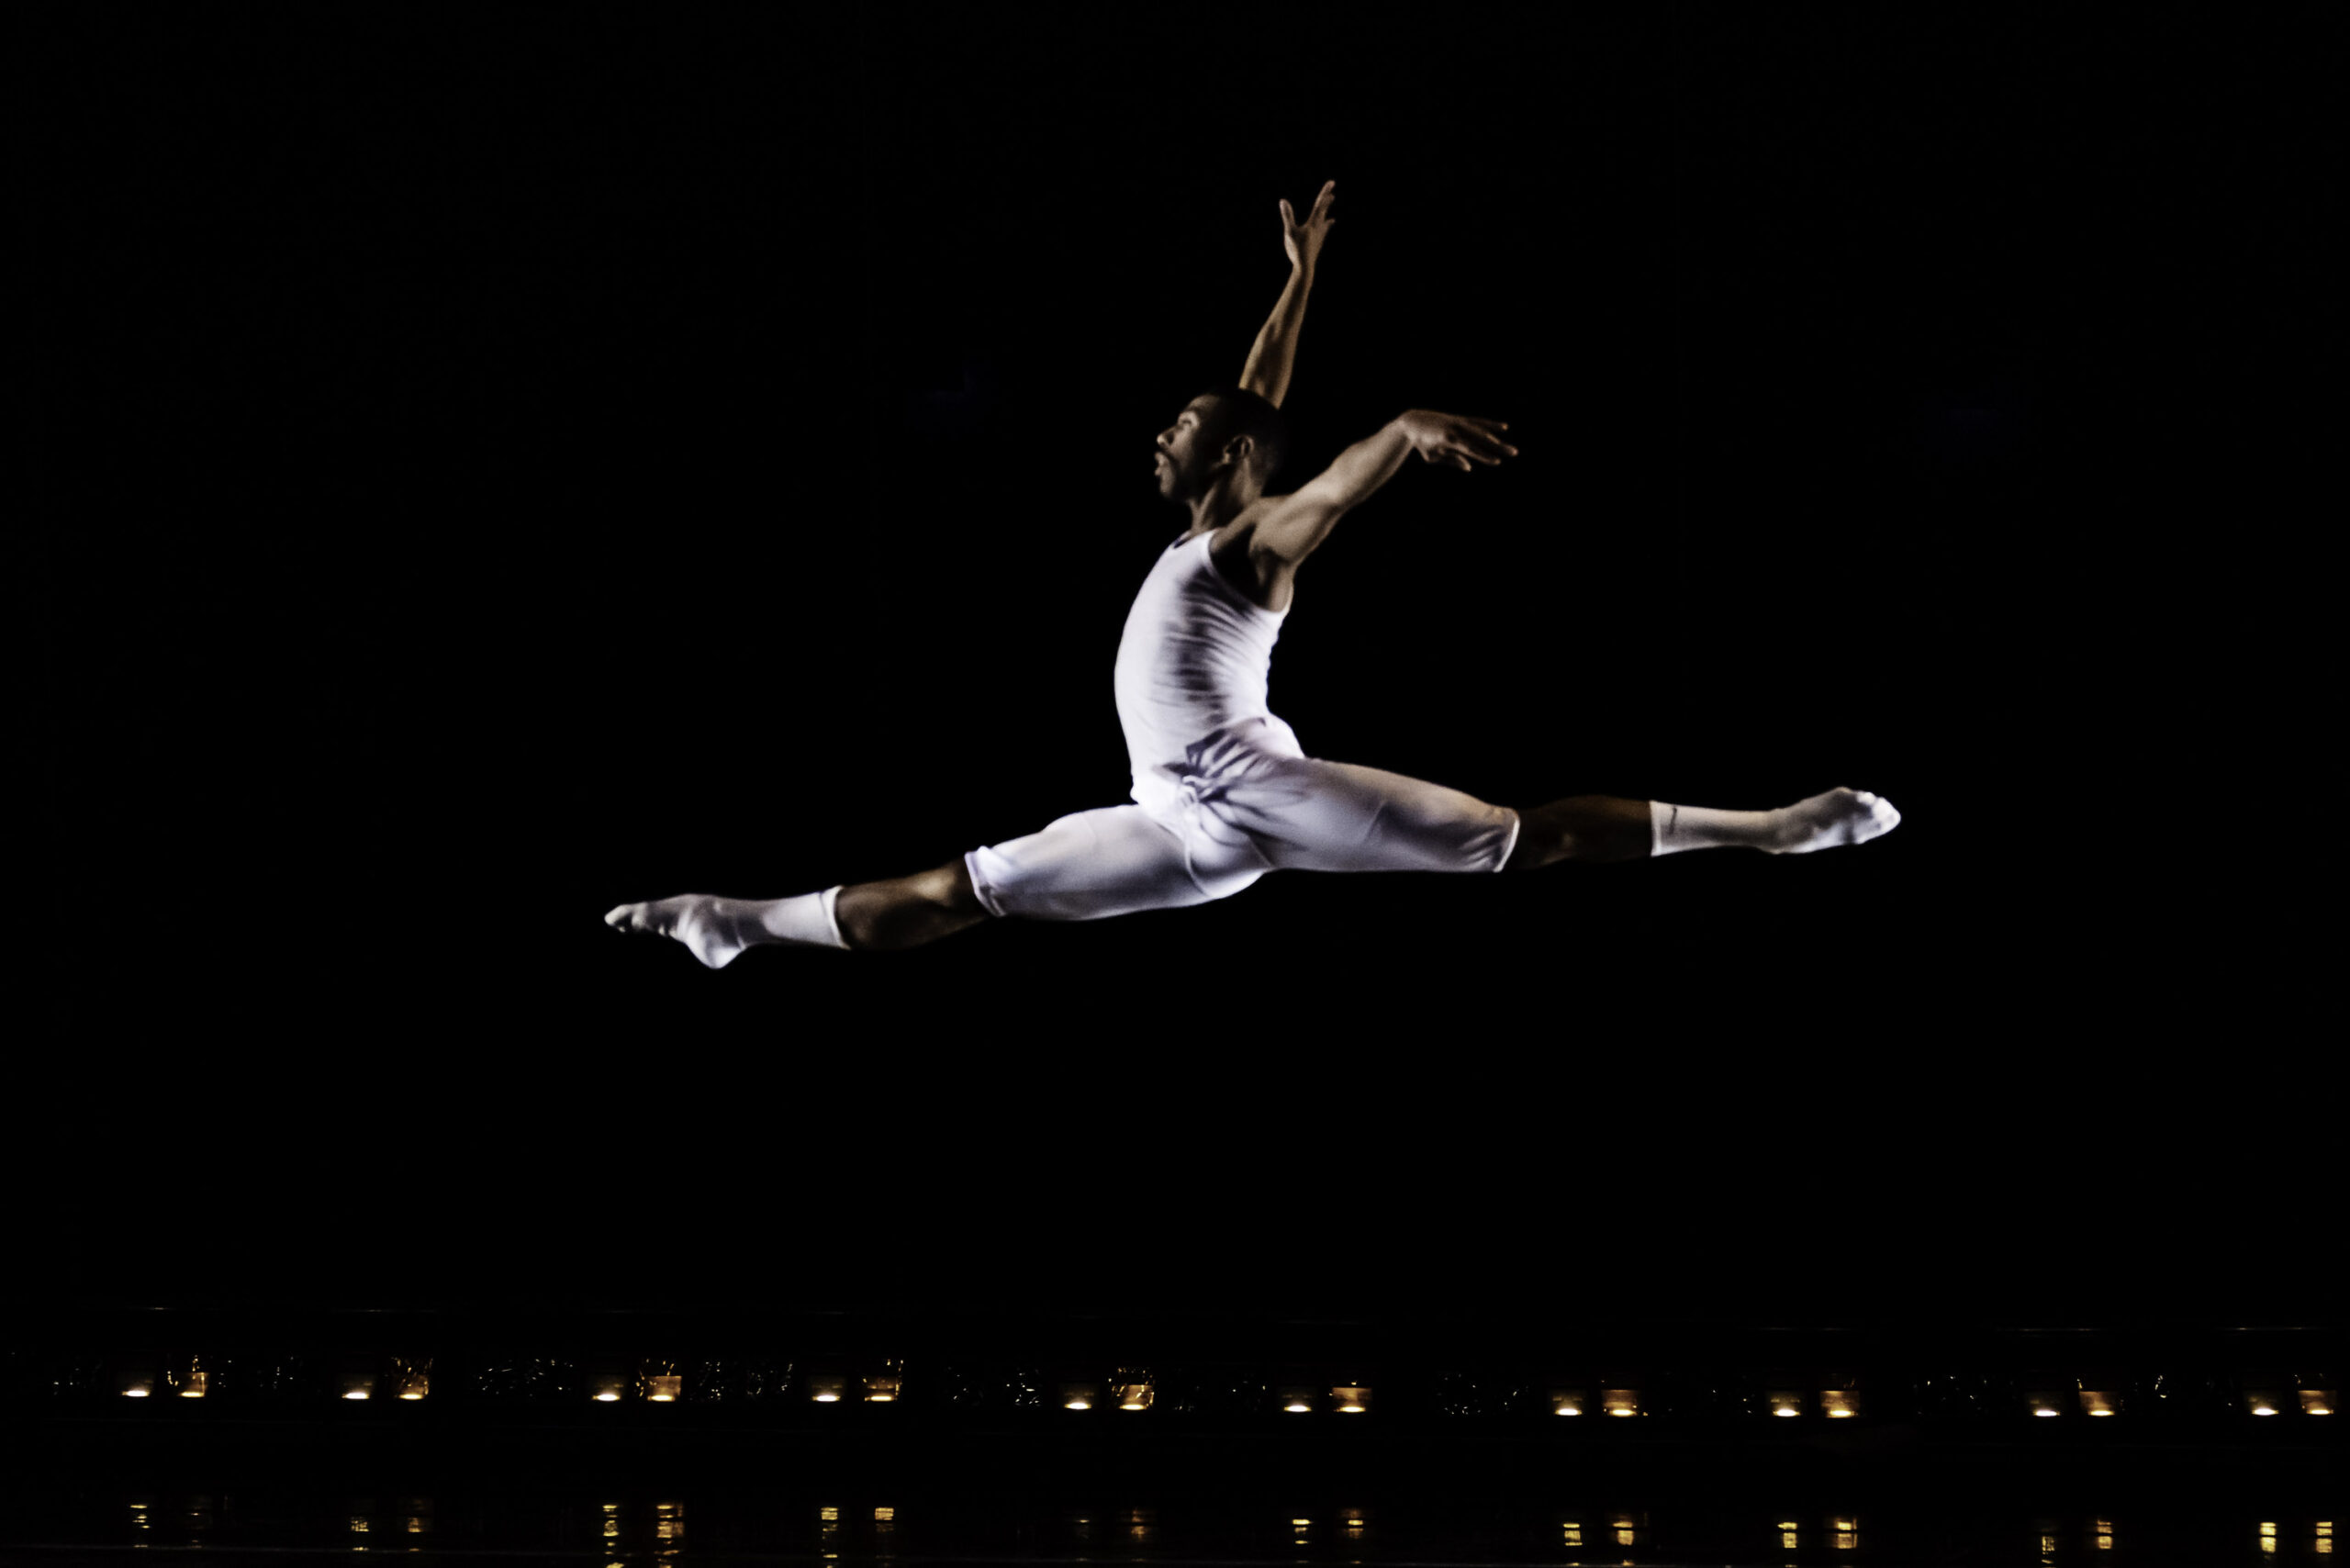 a male dancer wearing white performing a grand jete on stage